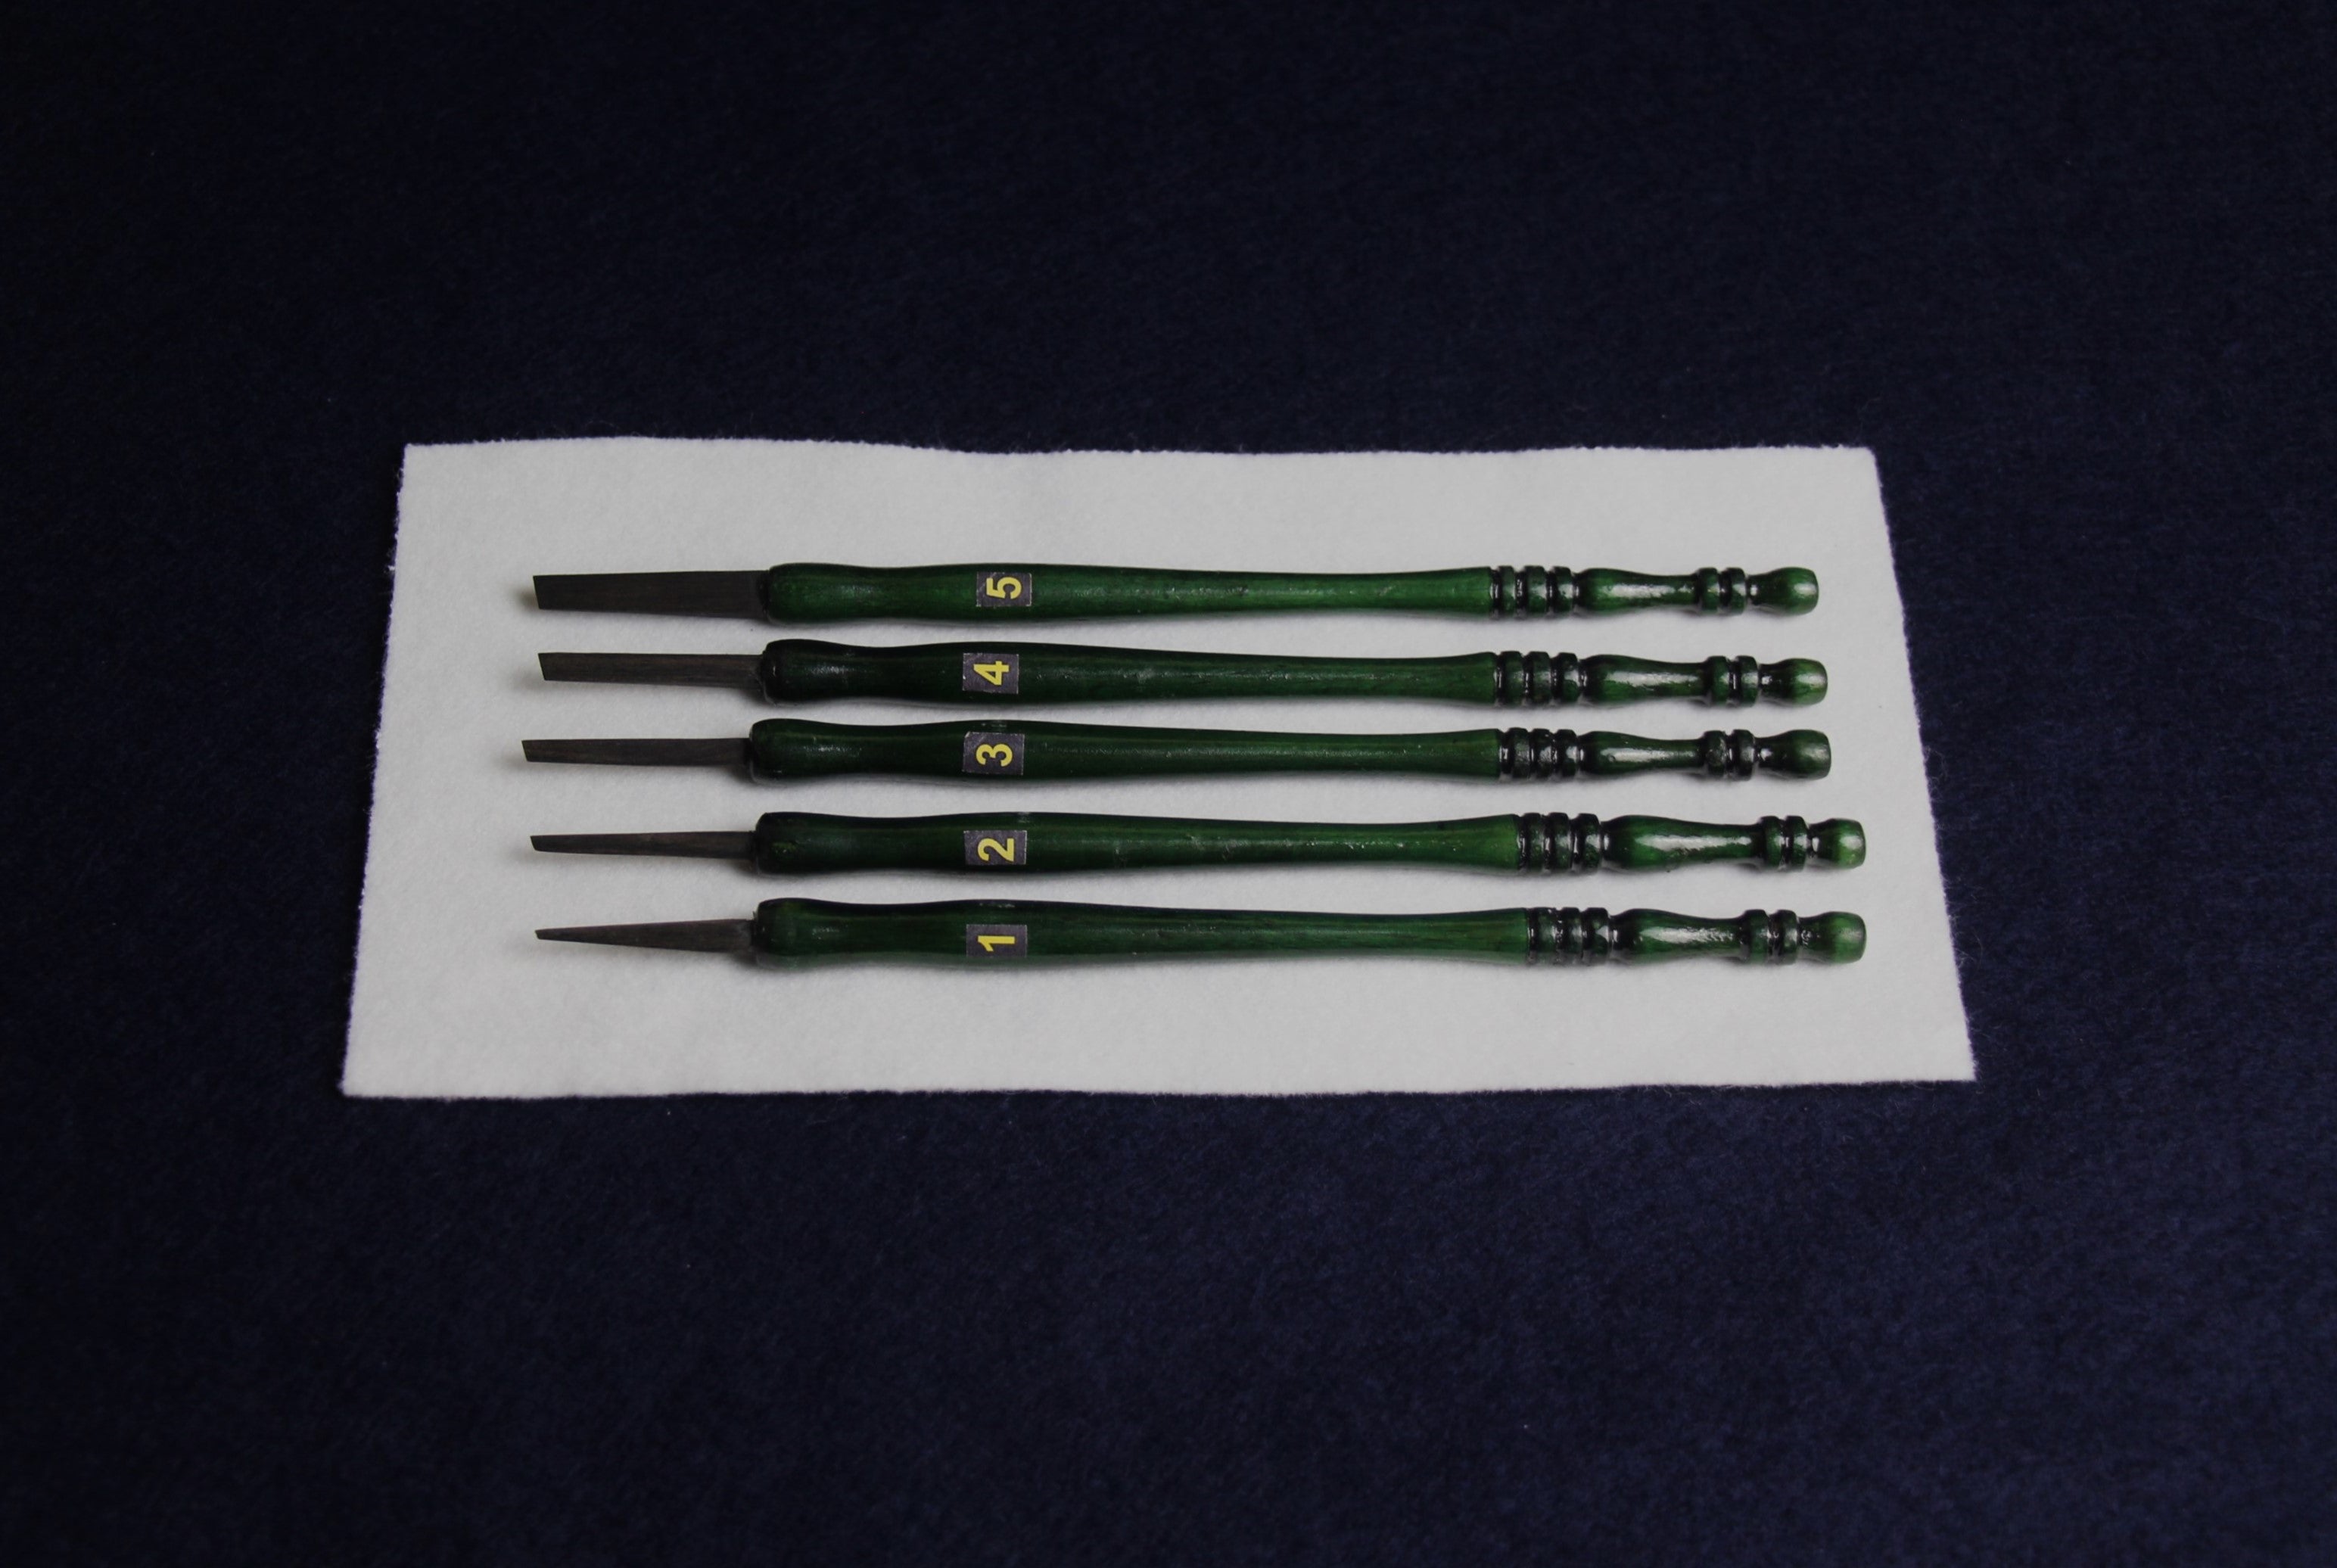 Set of 5 qalams for Arabic calligraphy with ebony nibs: 1 to 5 mm - olive green handle